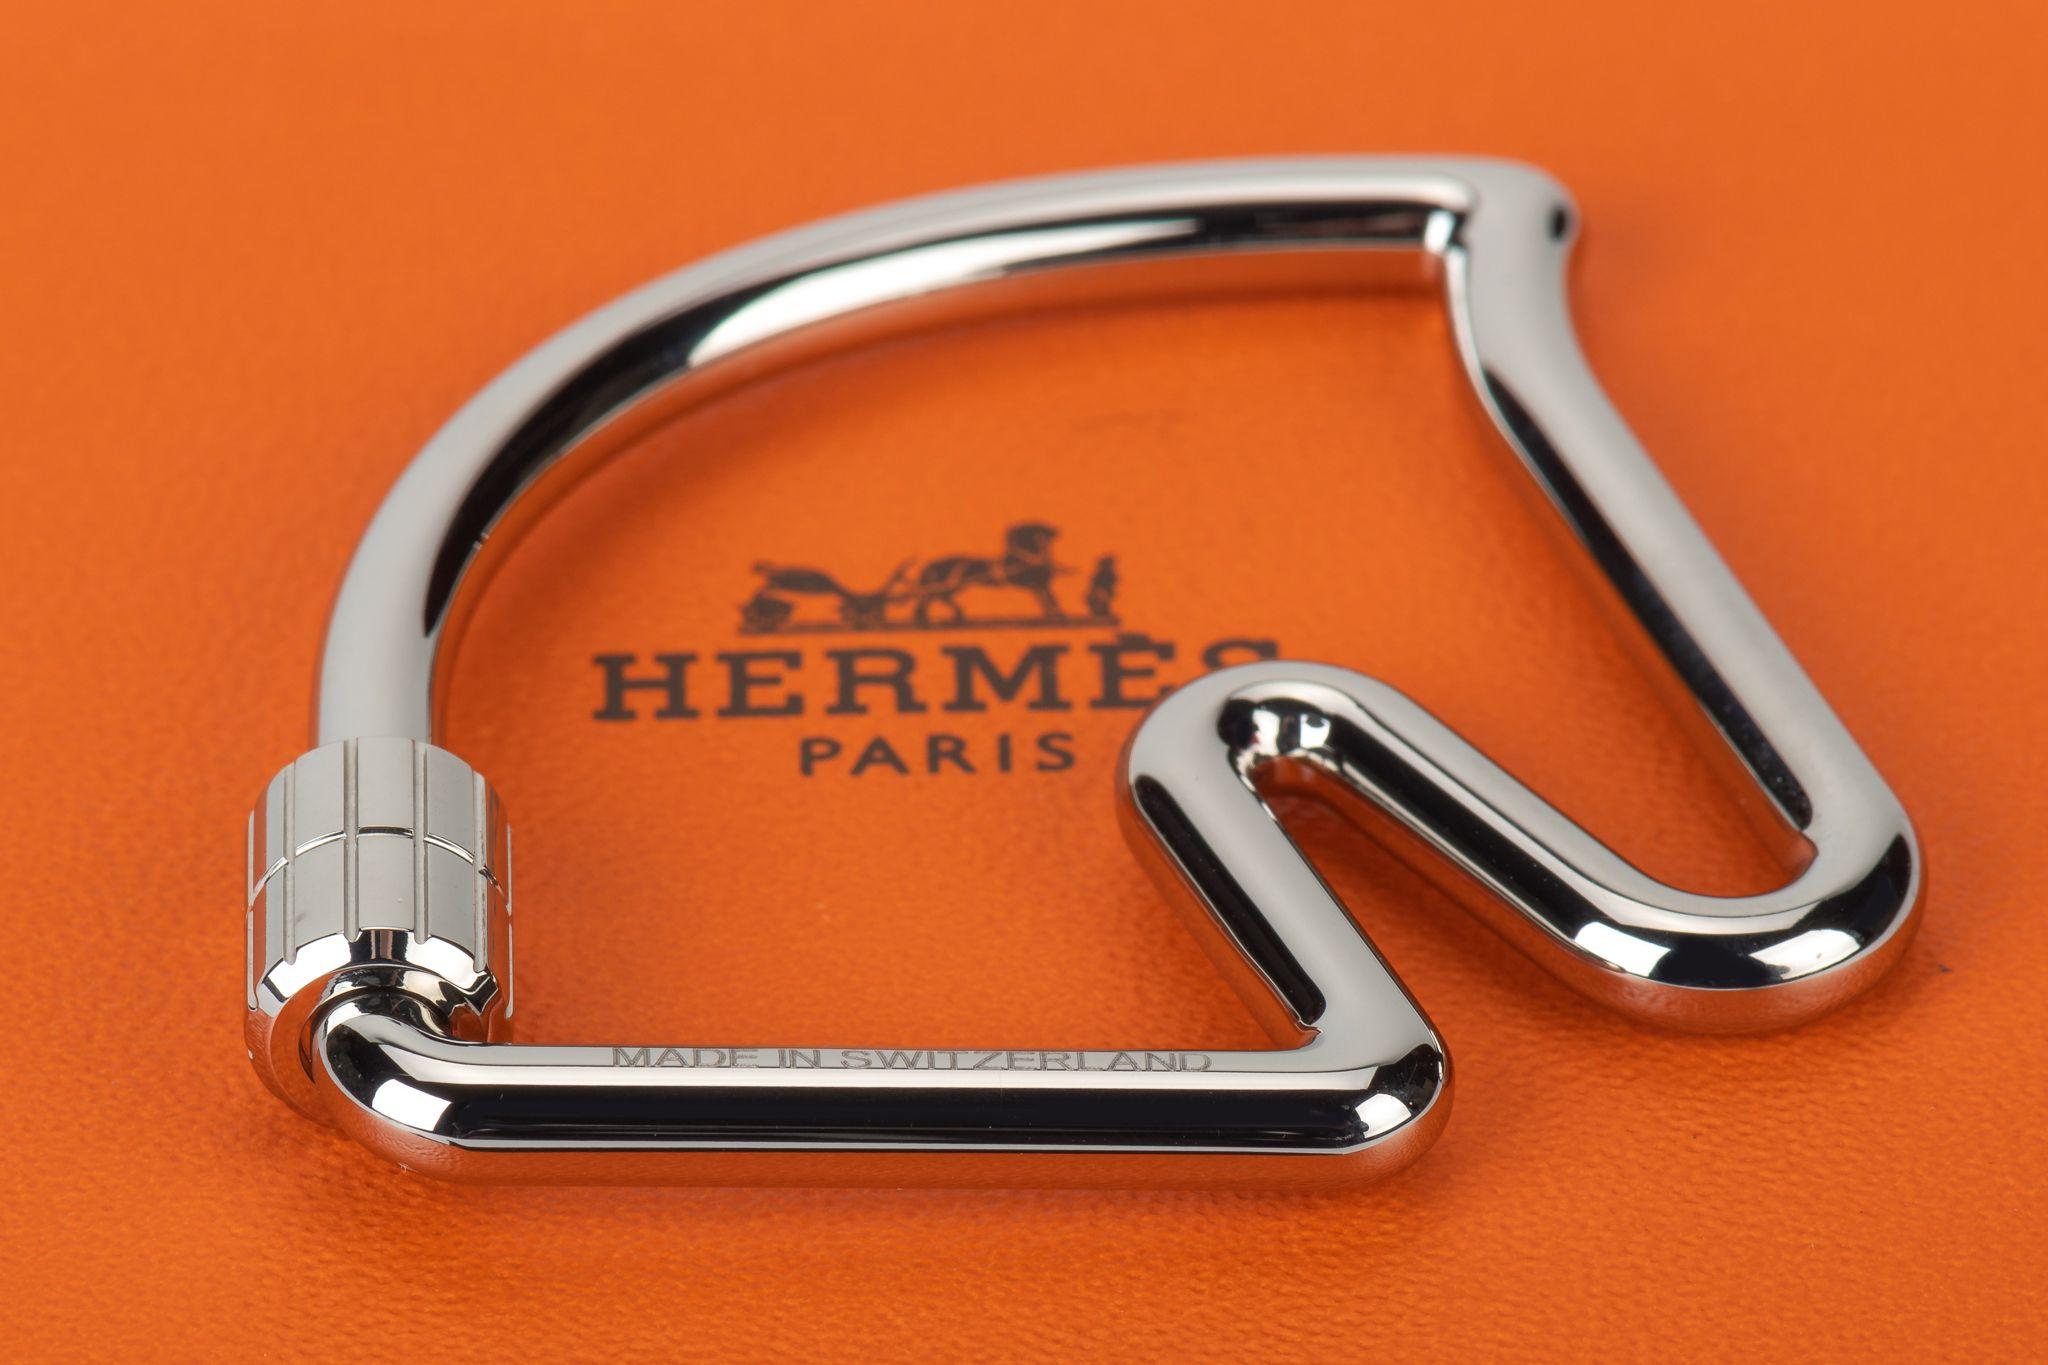 Hermès brand new in box horse keychain with addition key ring , can be used separately. Comes with suede pouches and box.